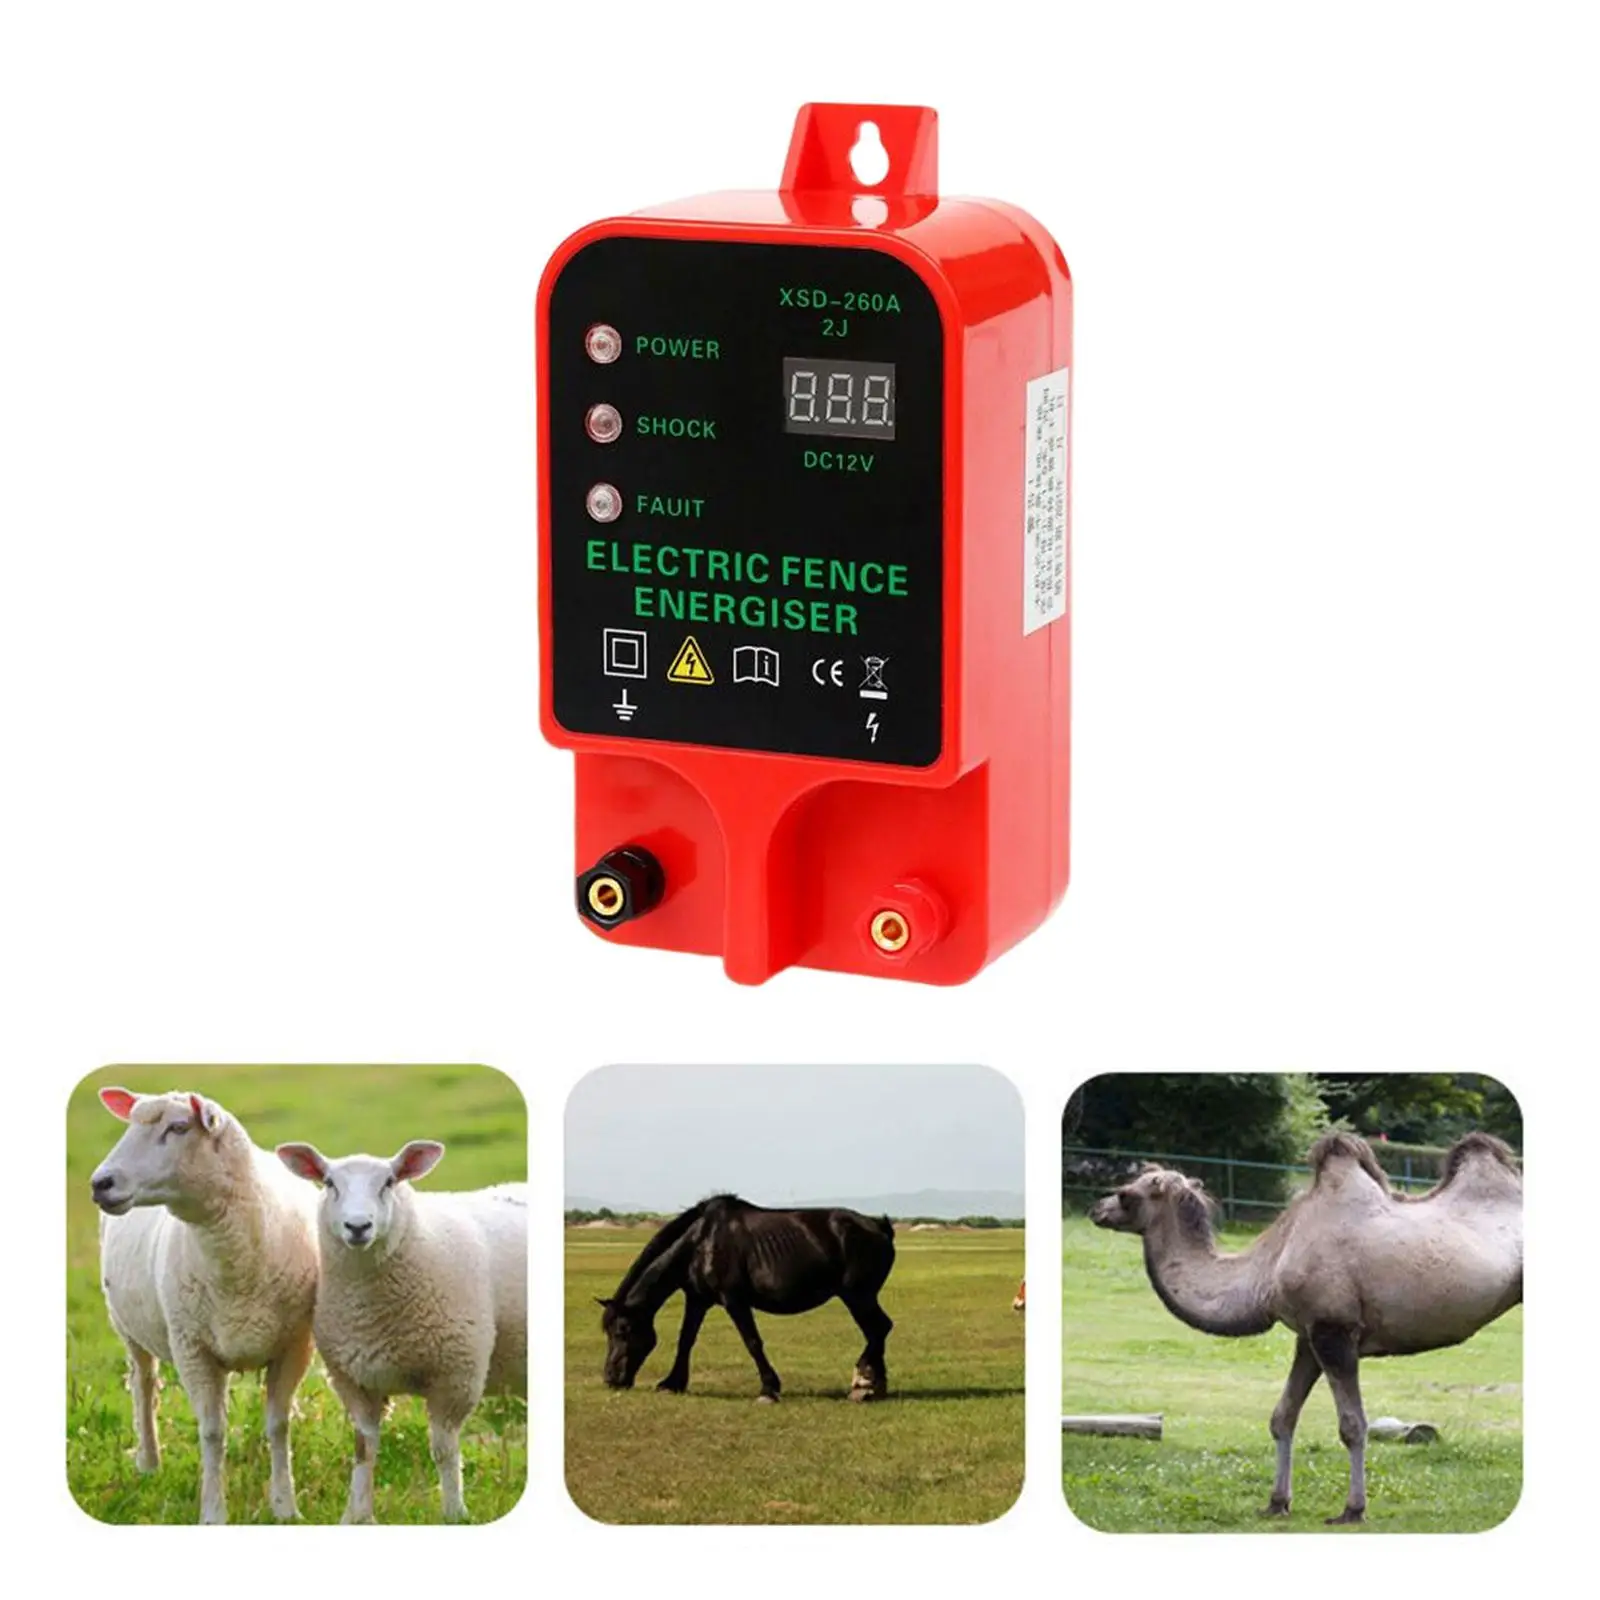 Portable Electric Fence Energizer Sheep Horse Cattle Fence Tool Controller LCD Display 10km Waterproof for Farm Fence US